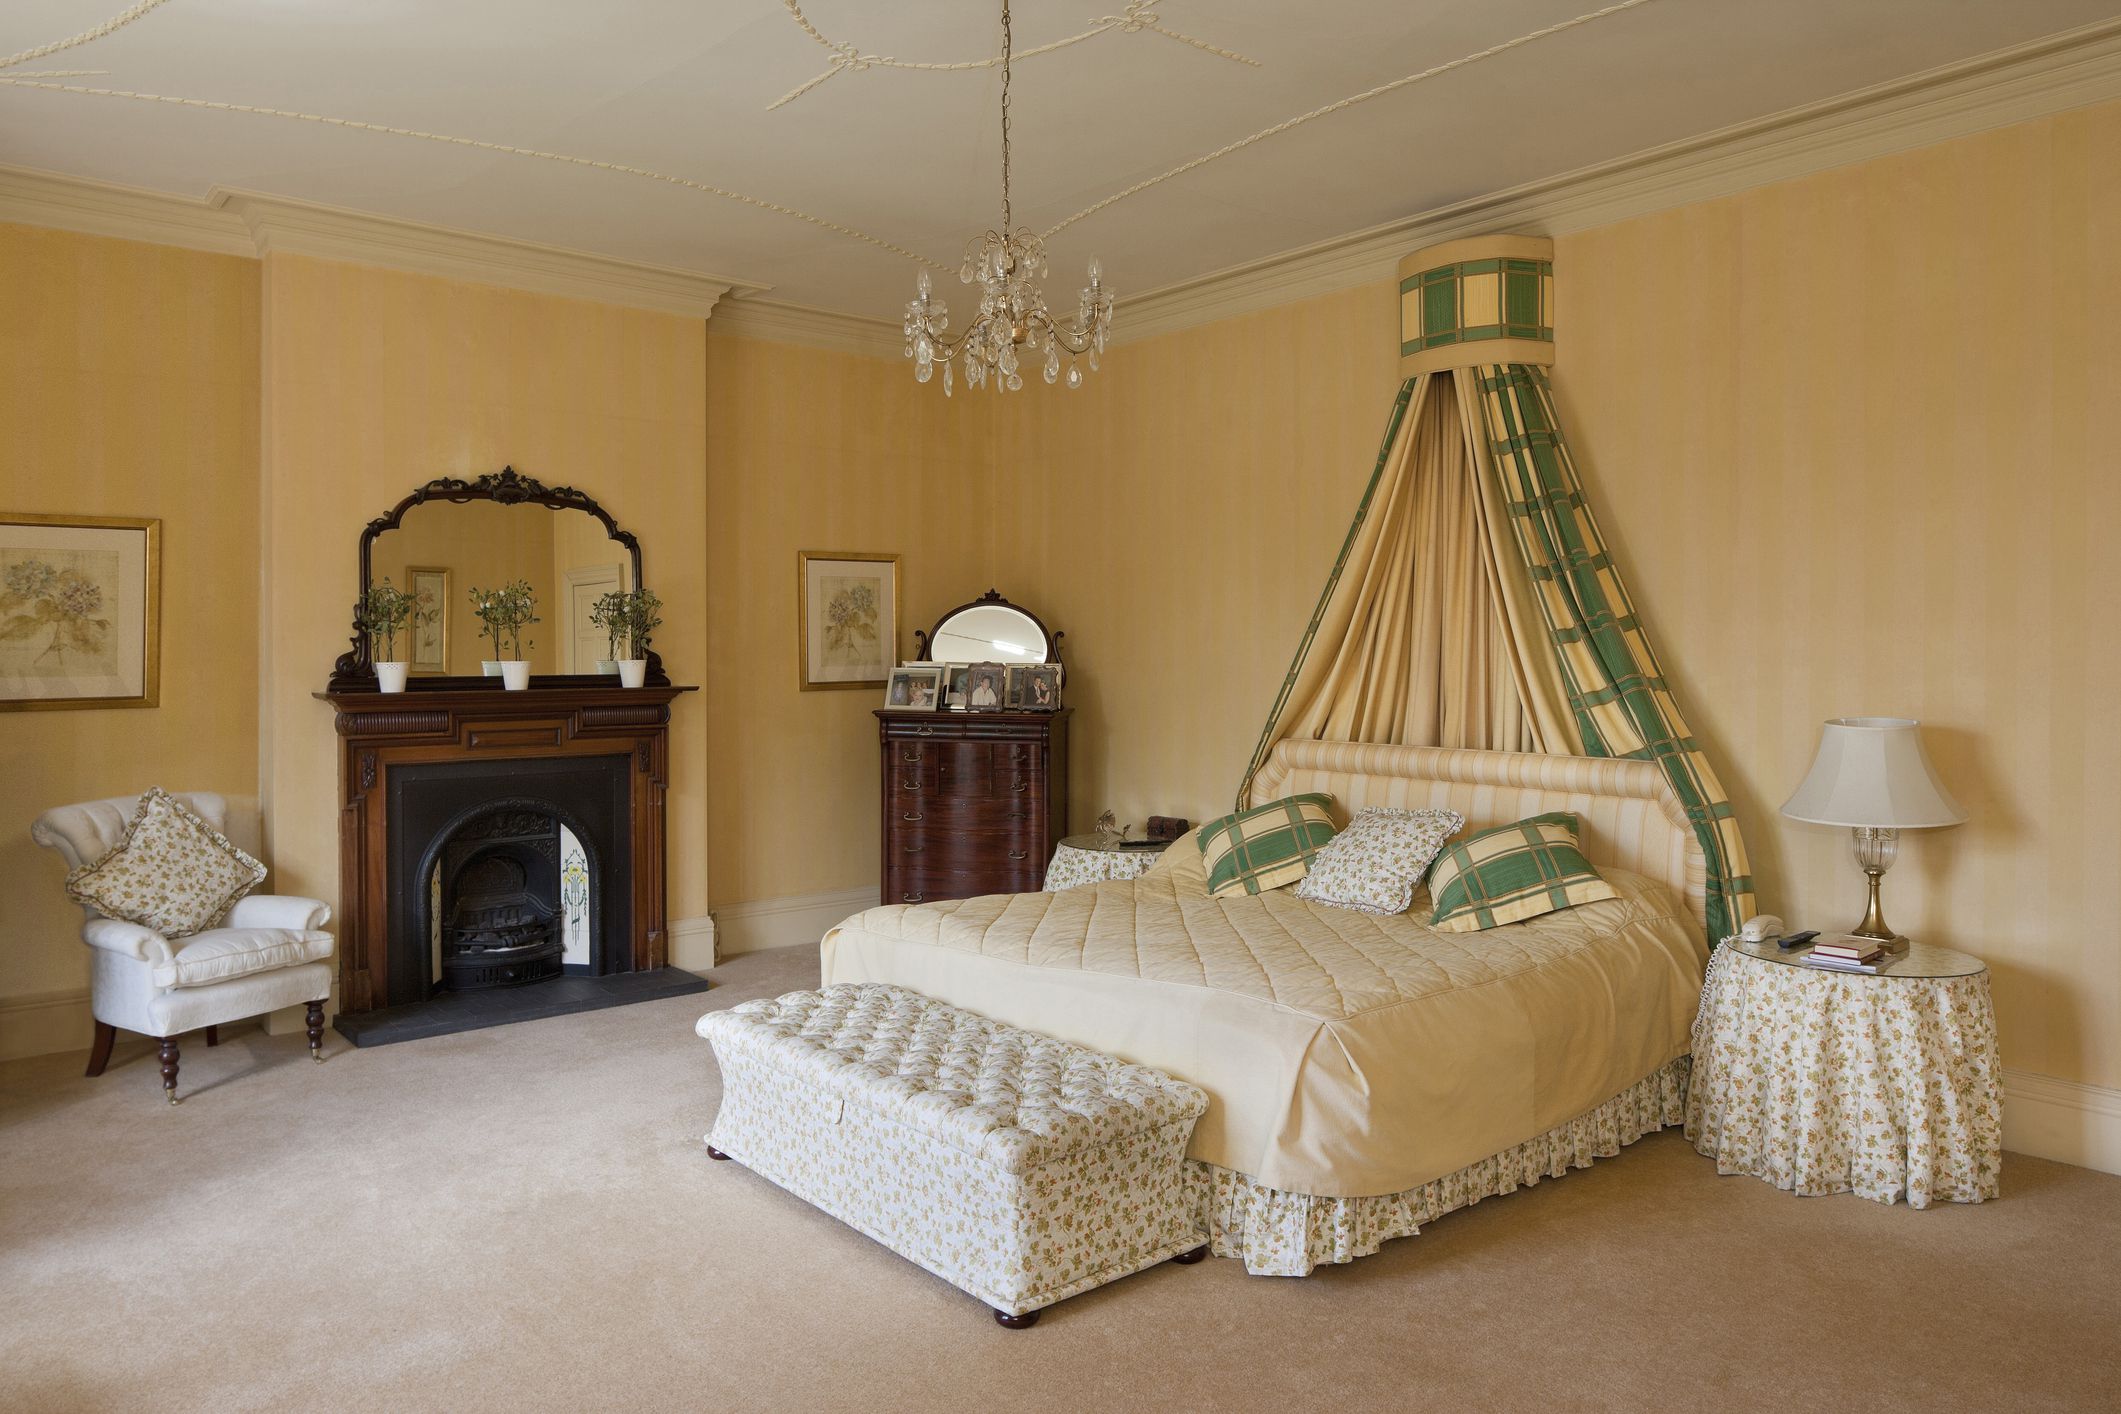 Creatice Victorian Bedrooms Ideas for Large Space